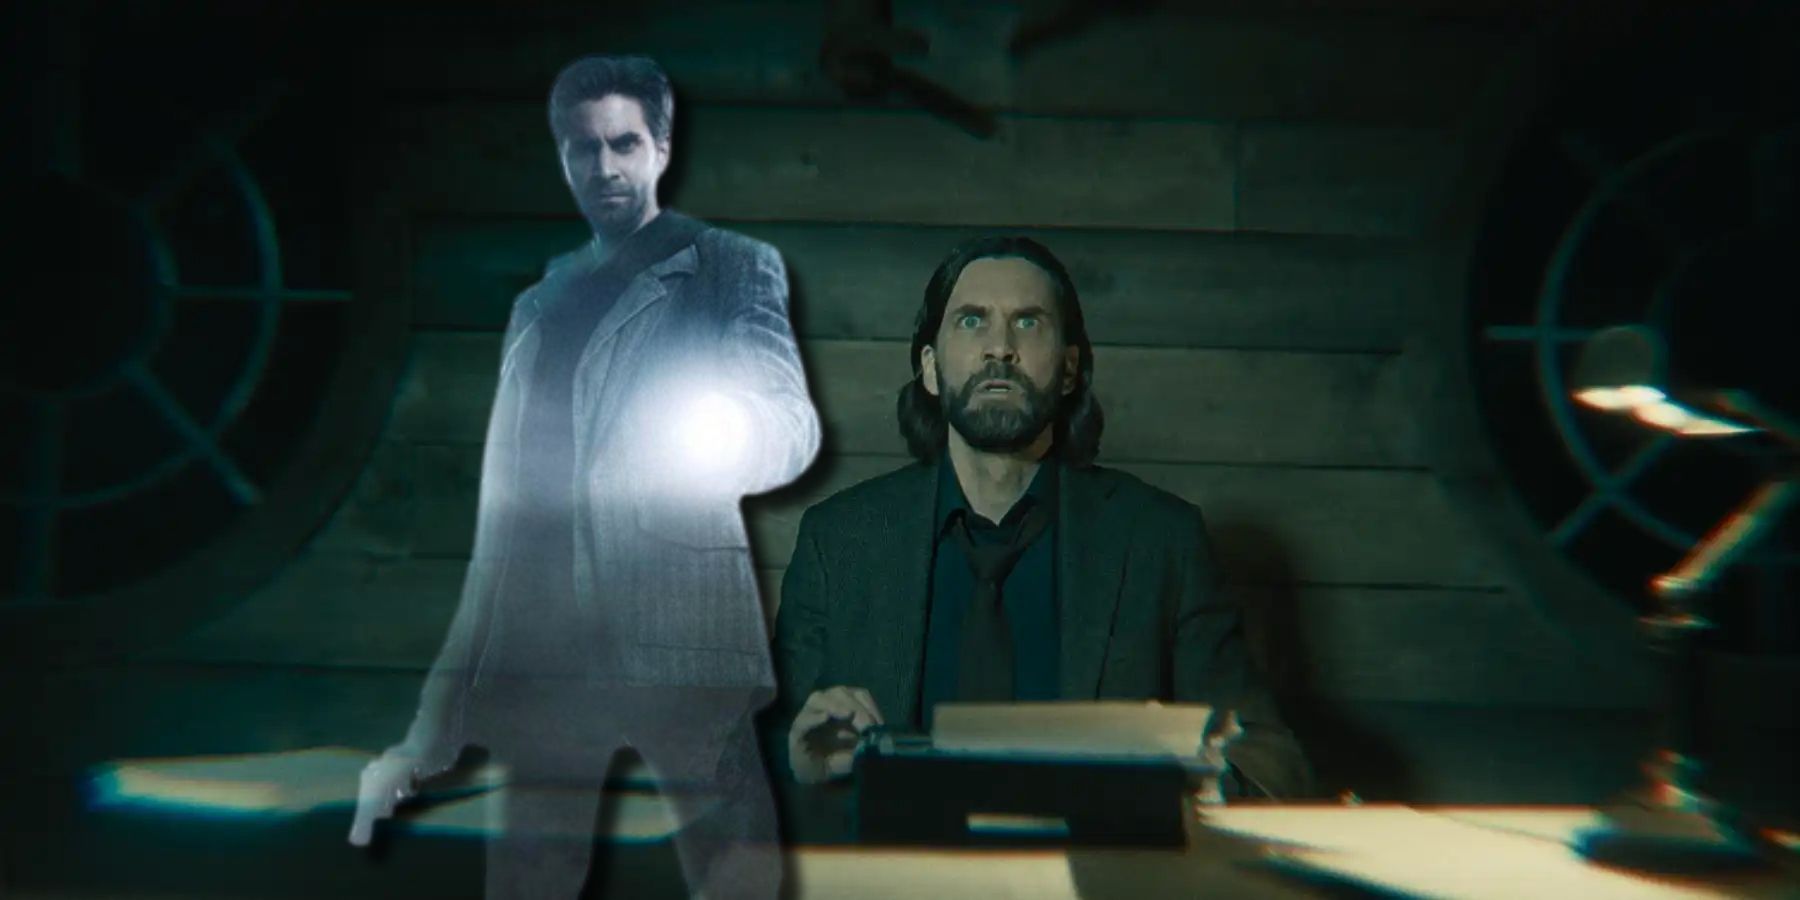 Alan Wake 2 newcomers don't need to have played the original game